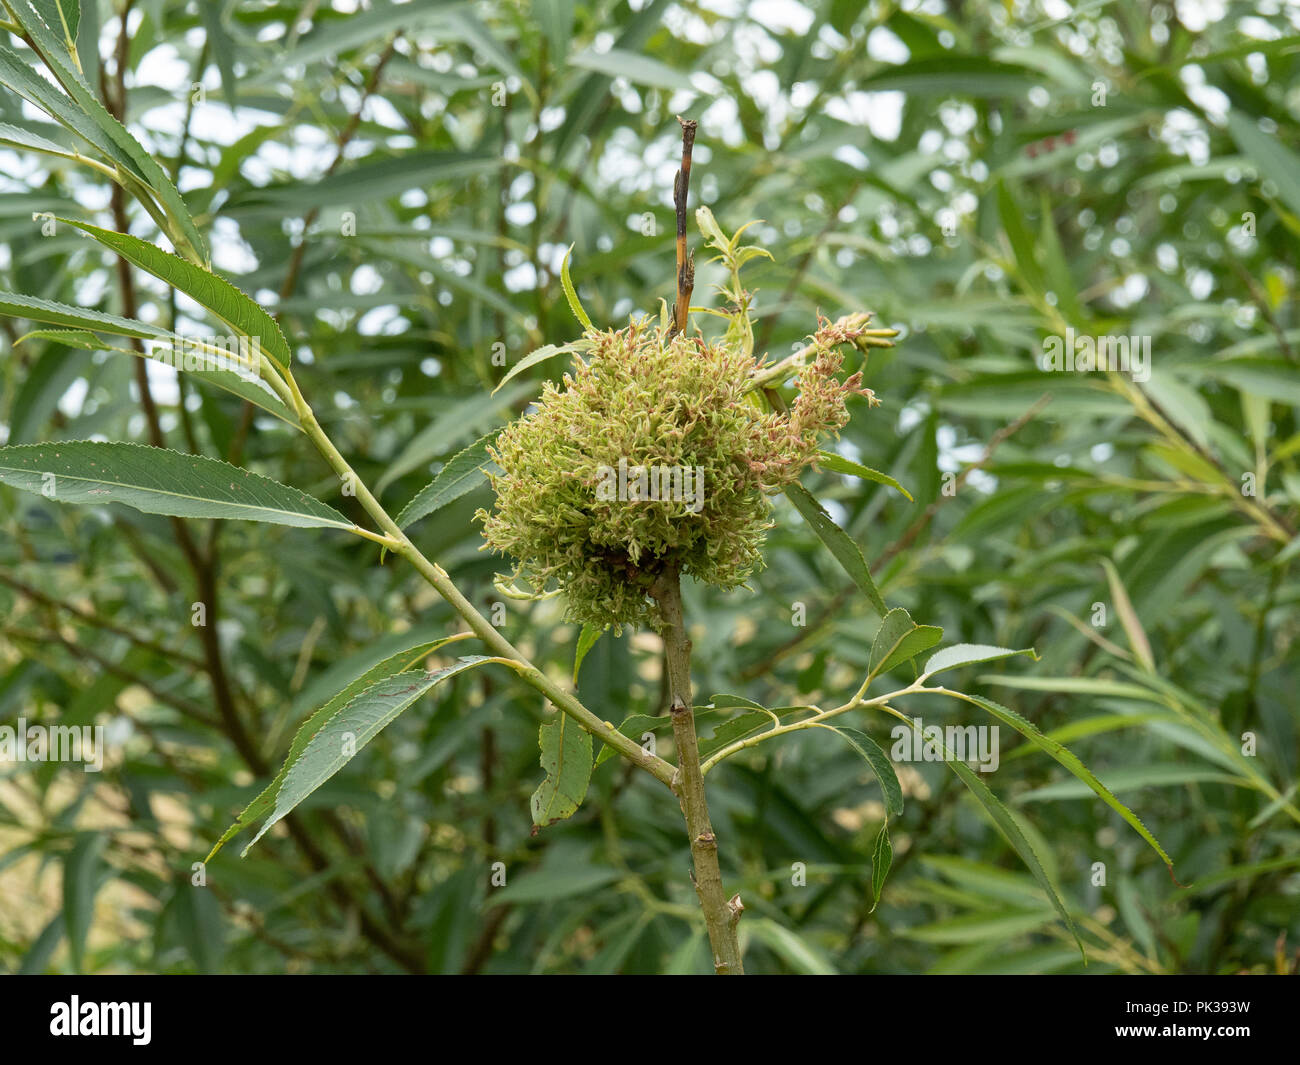 A the early stage of a witches broom growing on a willow sapling Stock Photo